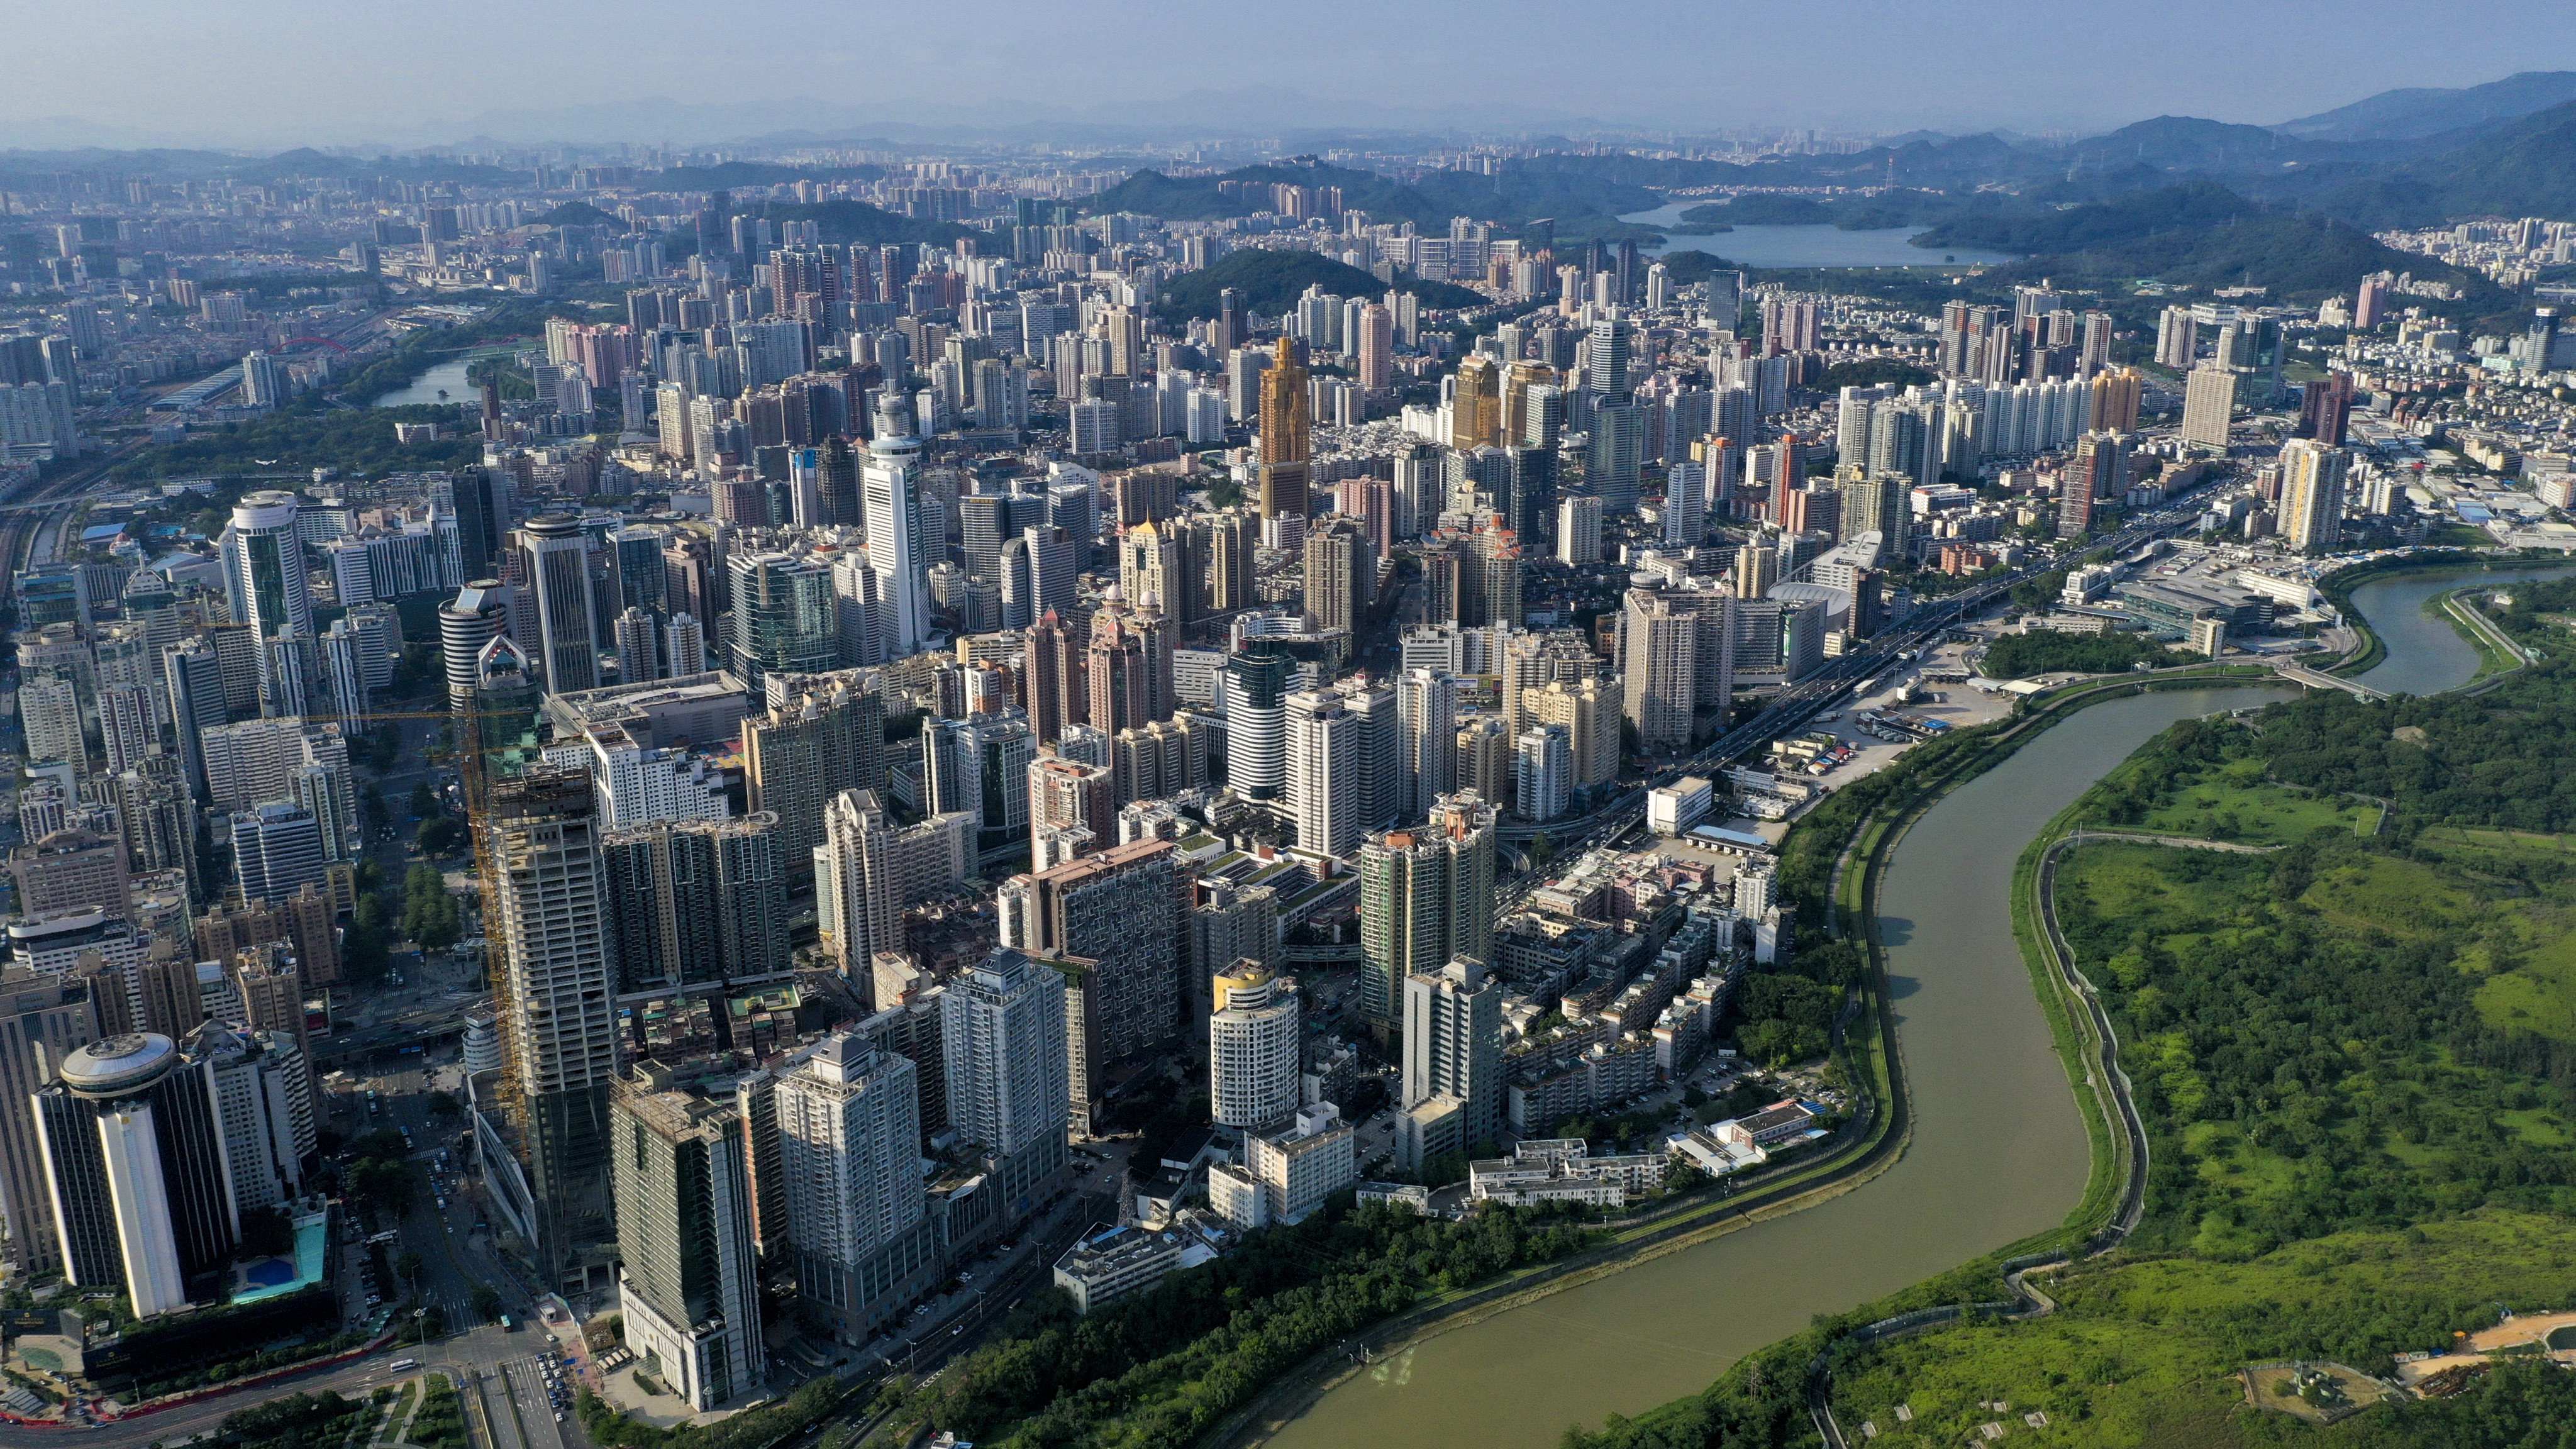 Shenzhen is one of 11 cities in the Greater Bay Area. Photo: Martin Chan